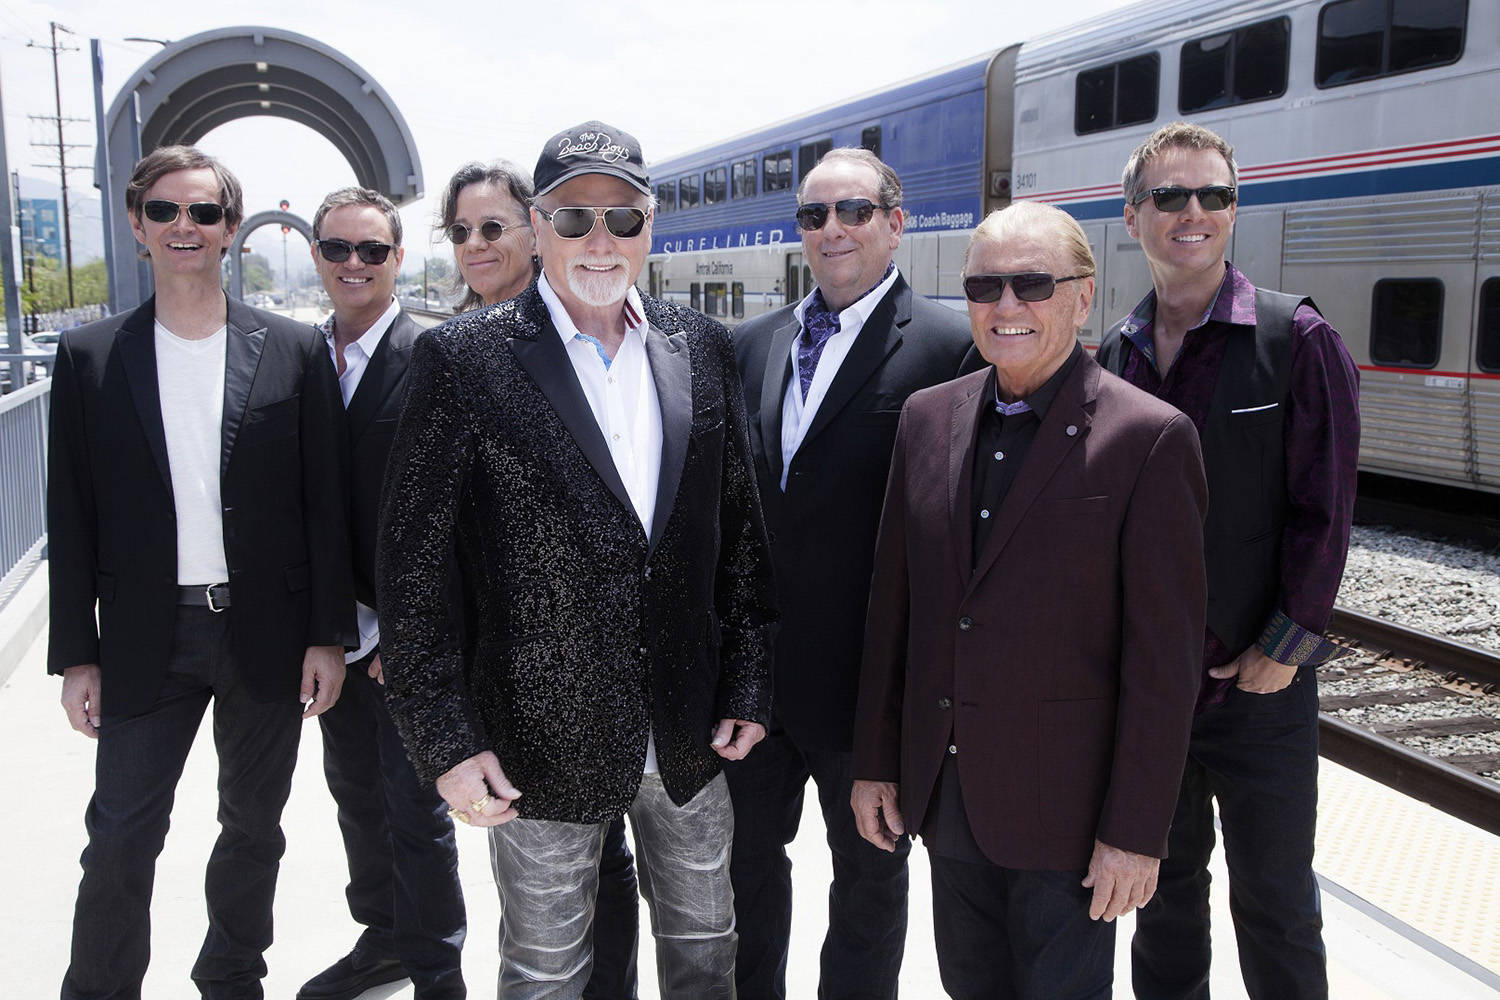 The Beach Boys, who are distinguished by their vocal harmonies and early surf songs, are one of the most influential acts of the rock era. COURTESY PHOTO